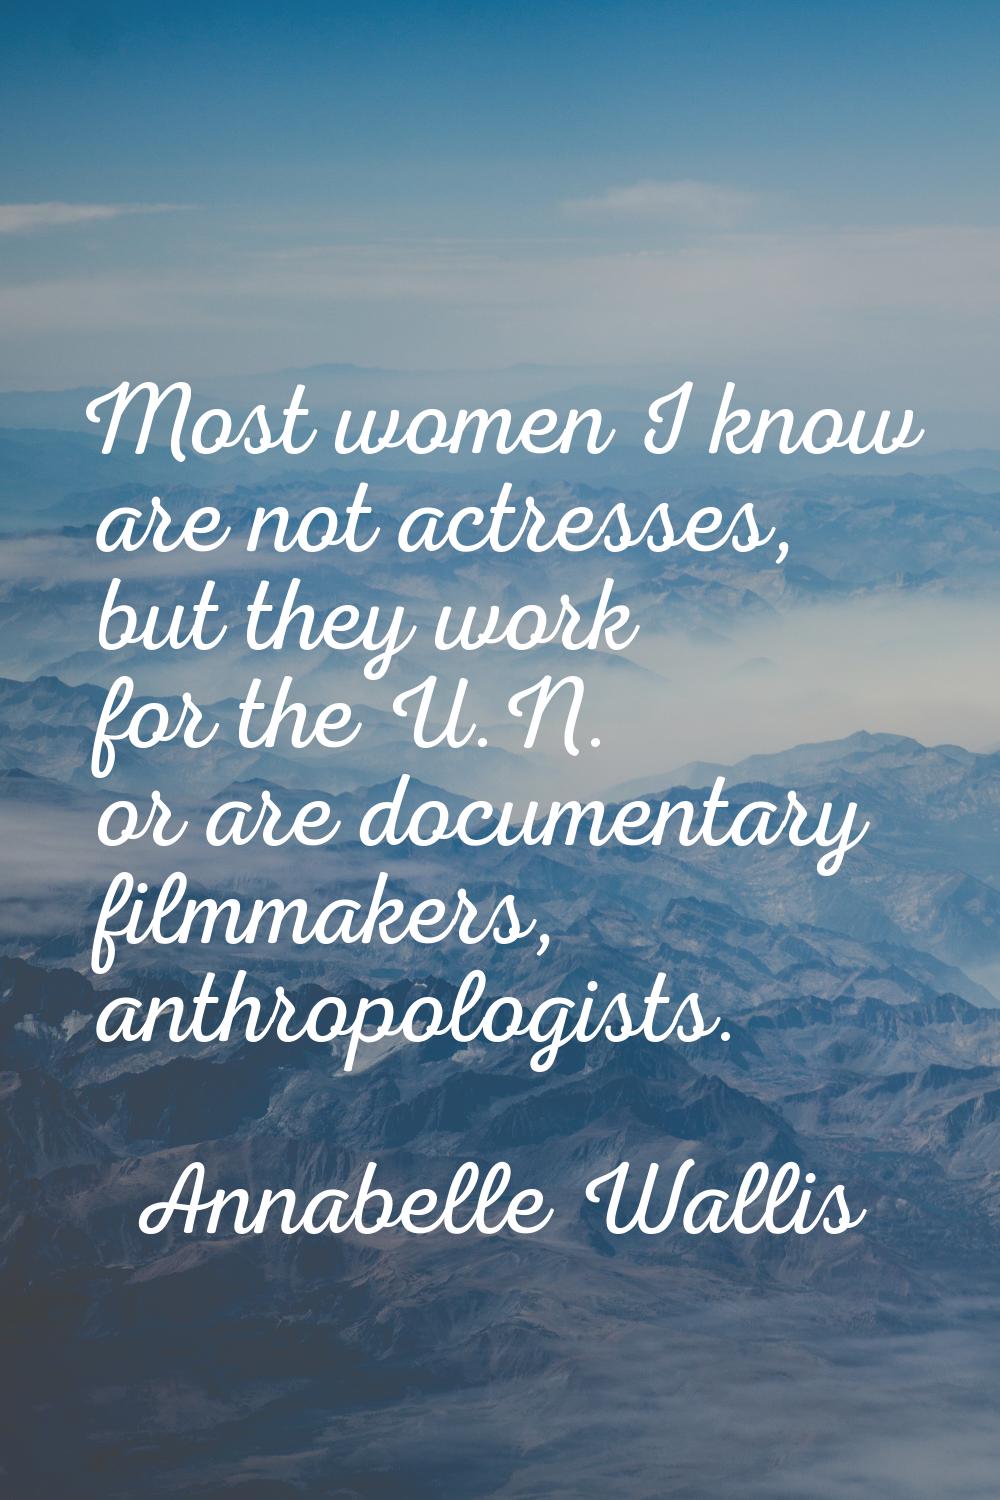 Most women I know are not actresses, but they work for the U.N. or are documentary filmmakers, anth